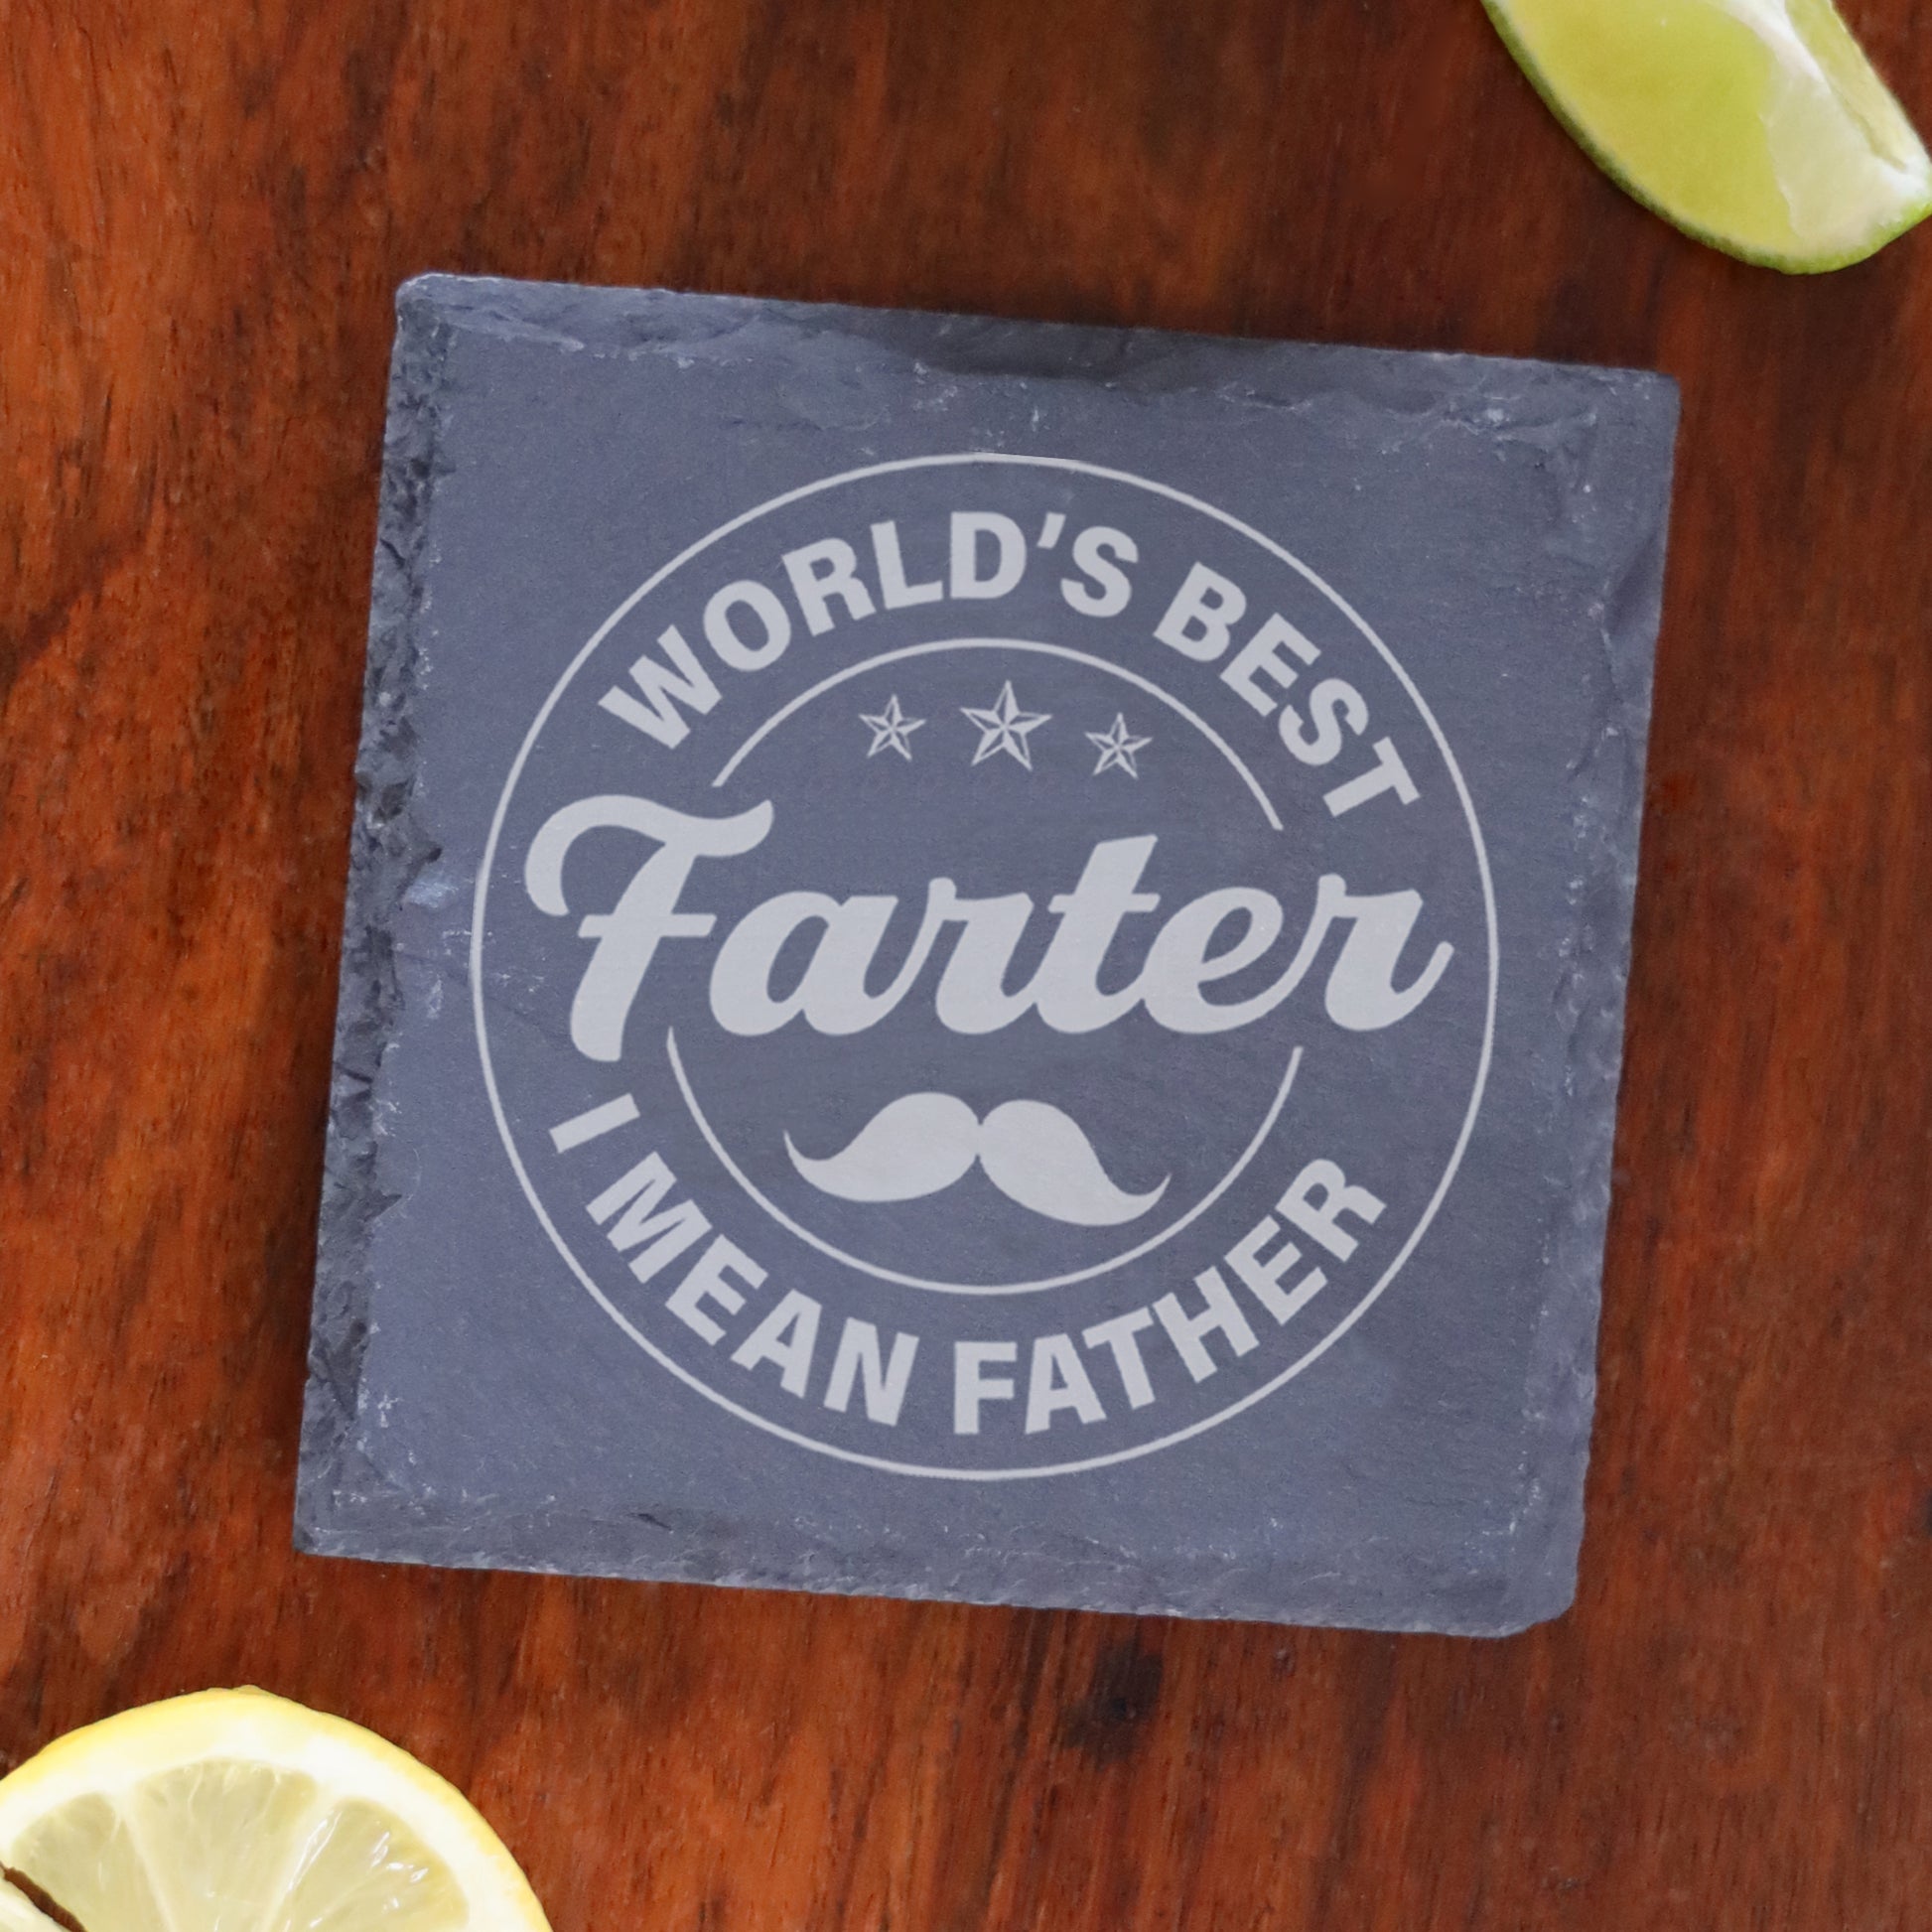 "Worlds Best Farter I Mean Father" Novelty Engraved Whisky Glass  - Always Looking Good - Square Coaster Only  